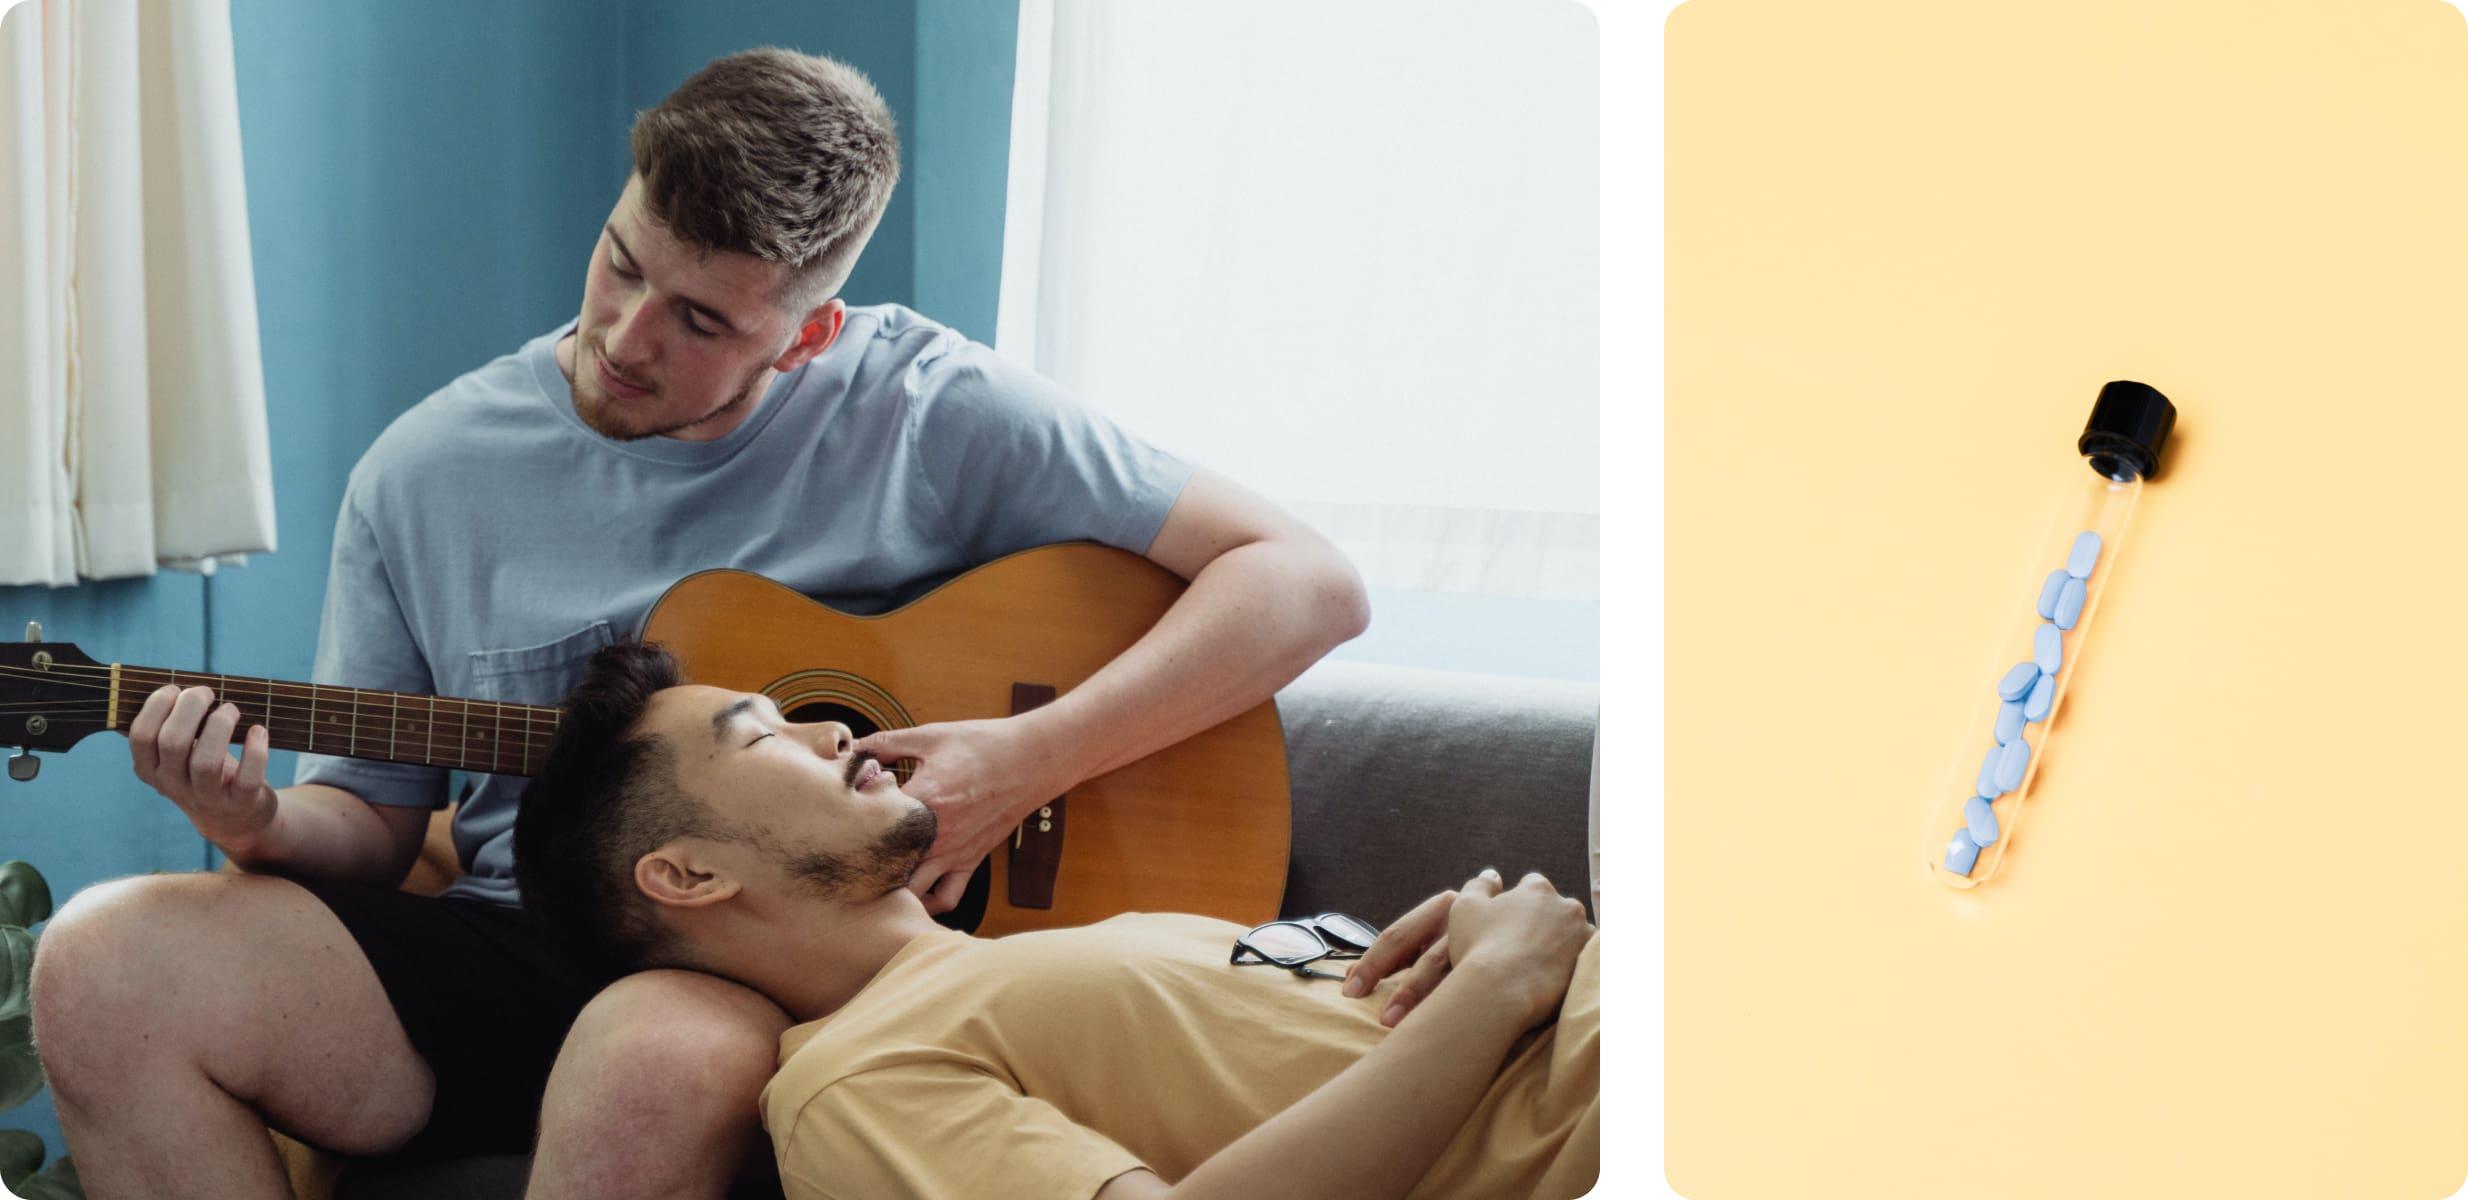 Two images. The first of a man playing a guitar to another man and the other of a bottle of prep pills